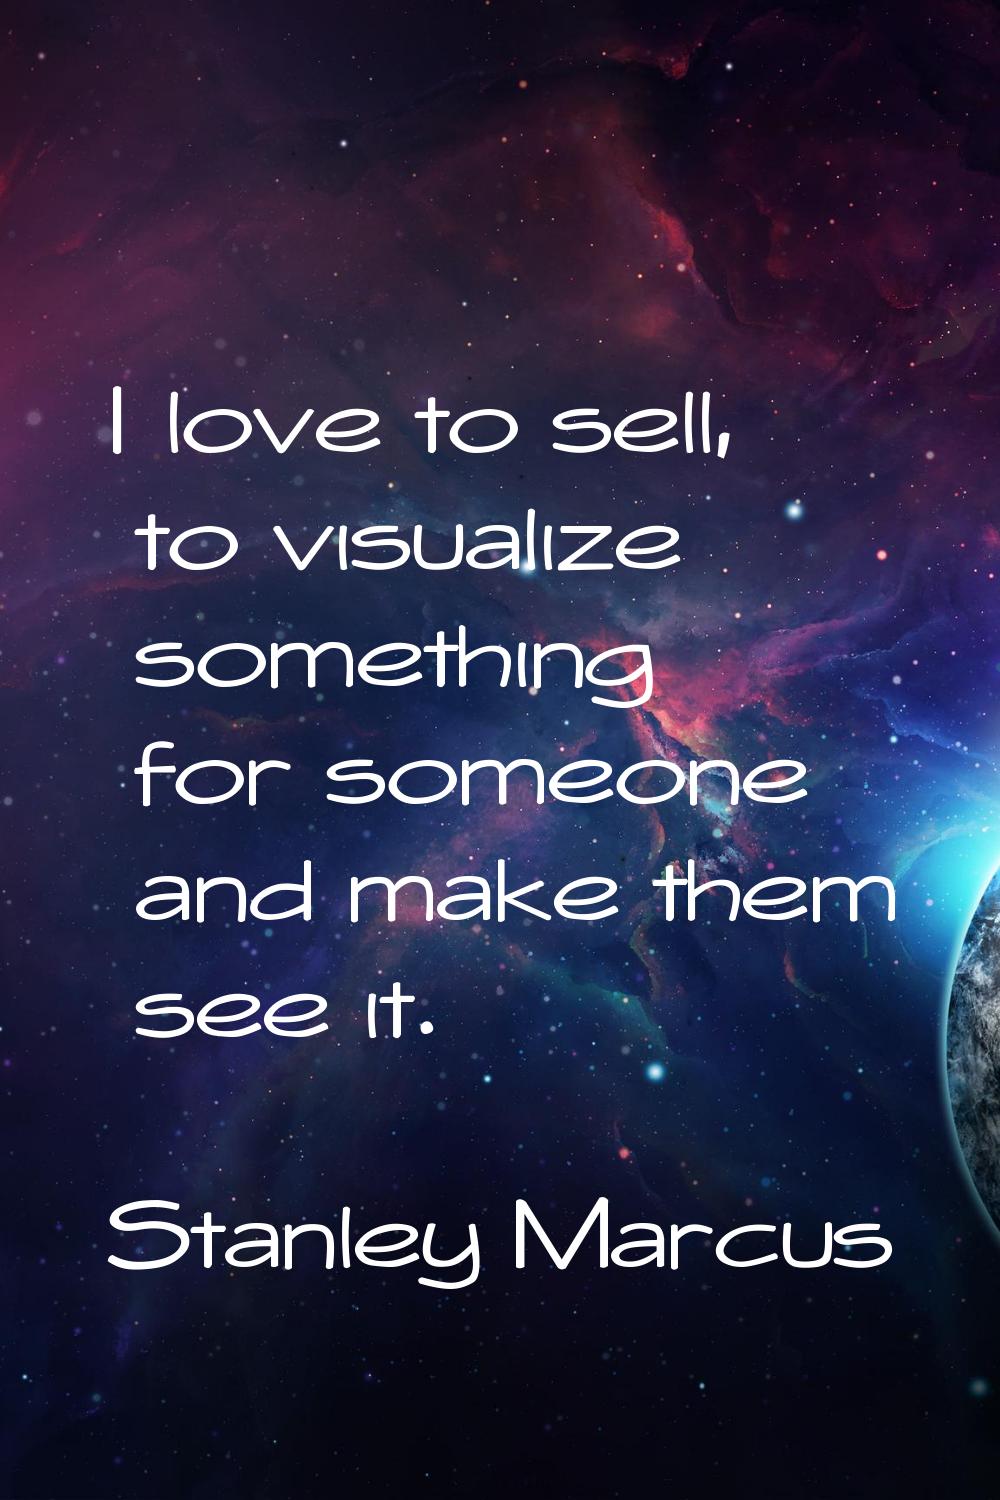 I love to sell, to visualize something for someone and make them see it.